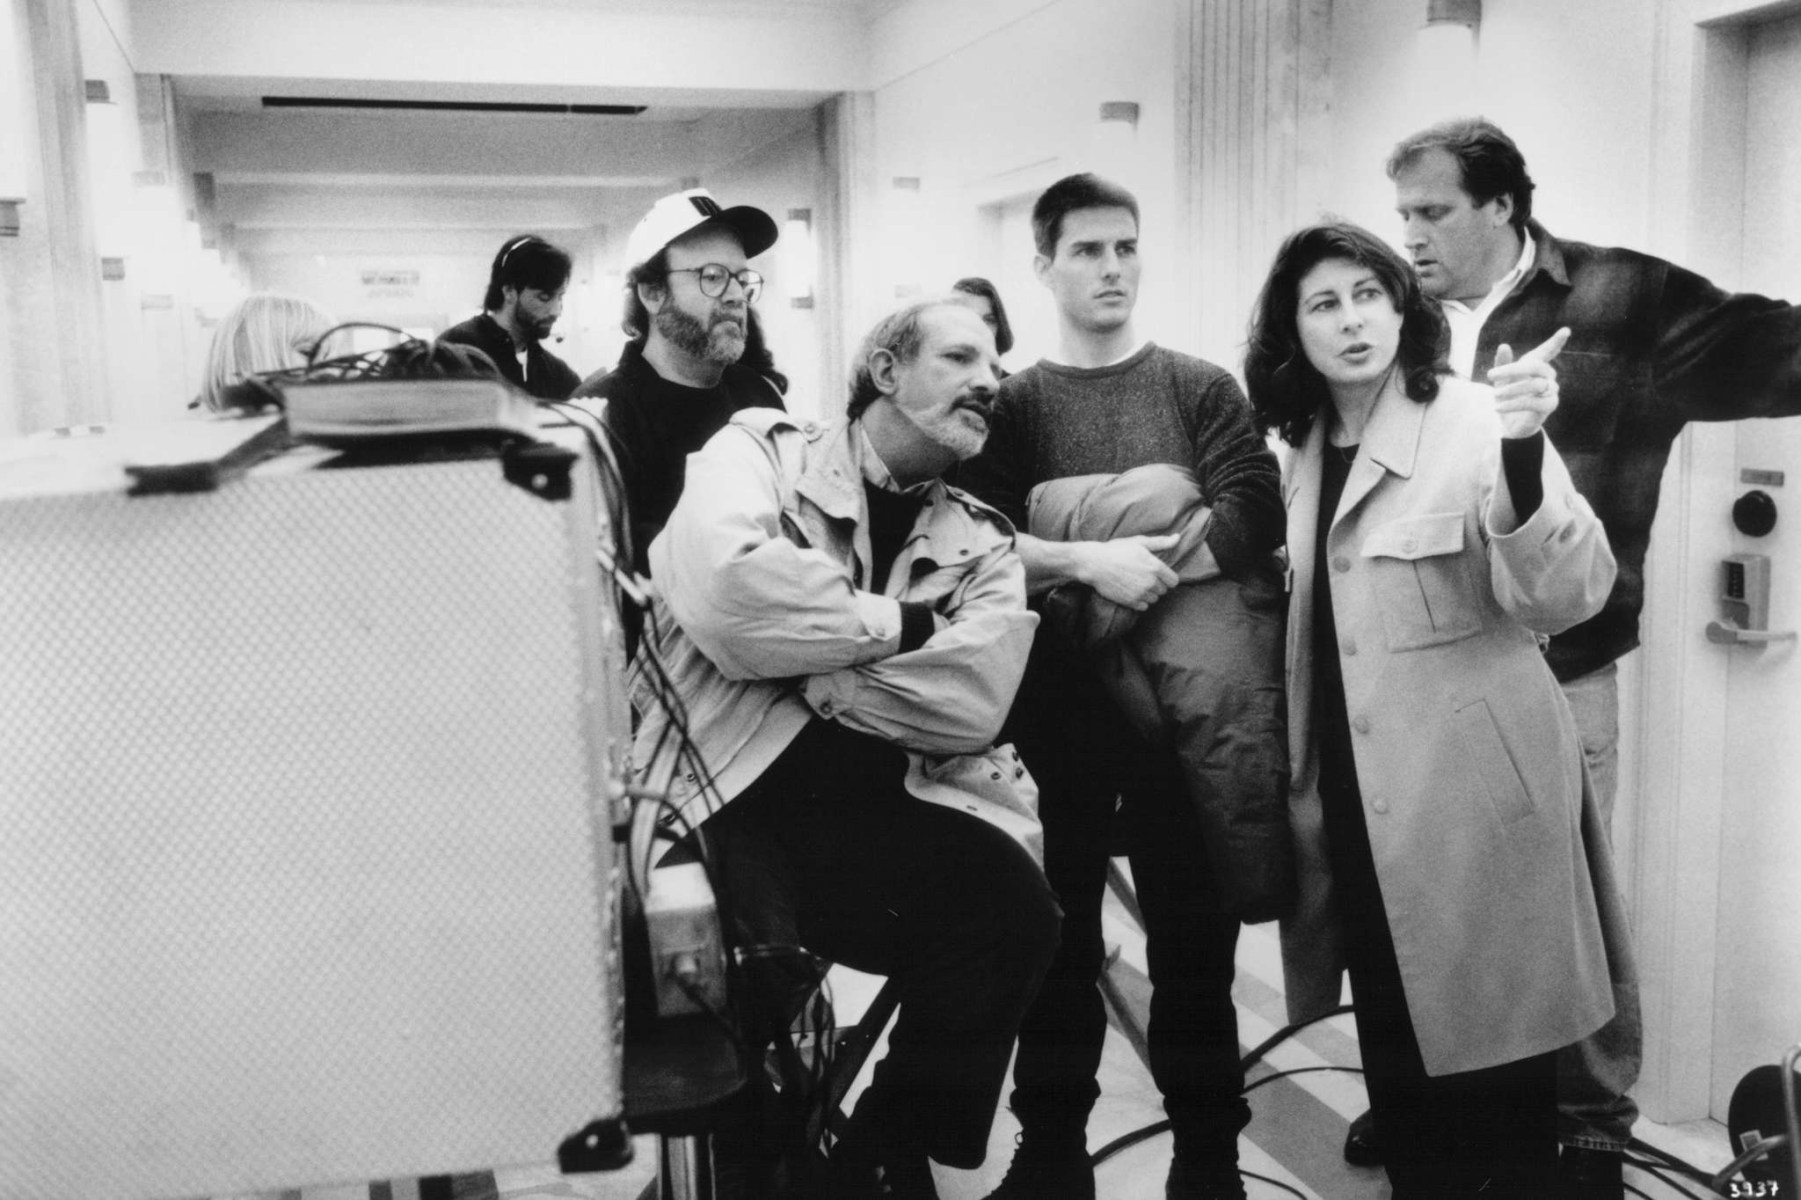 Mission Impossible (1996) Behind the Scenes